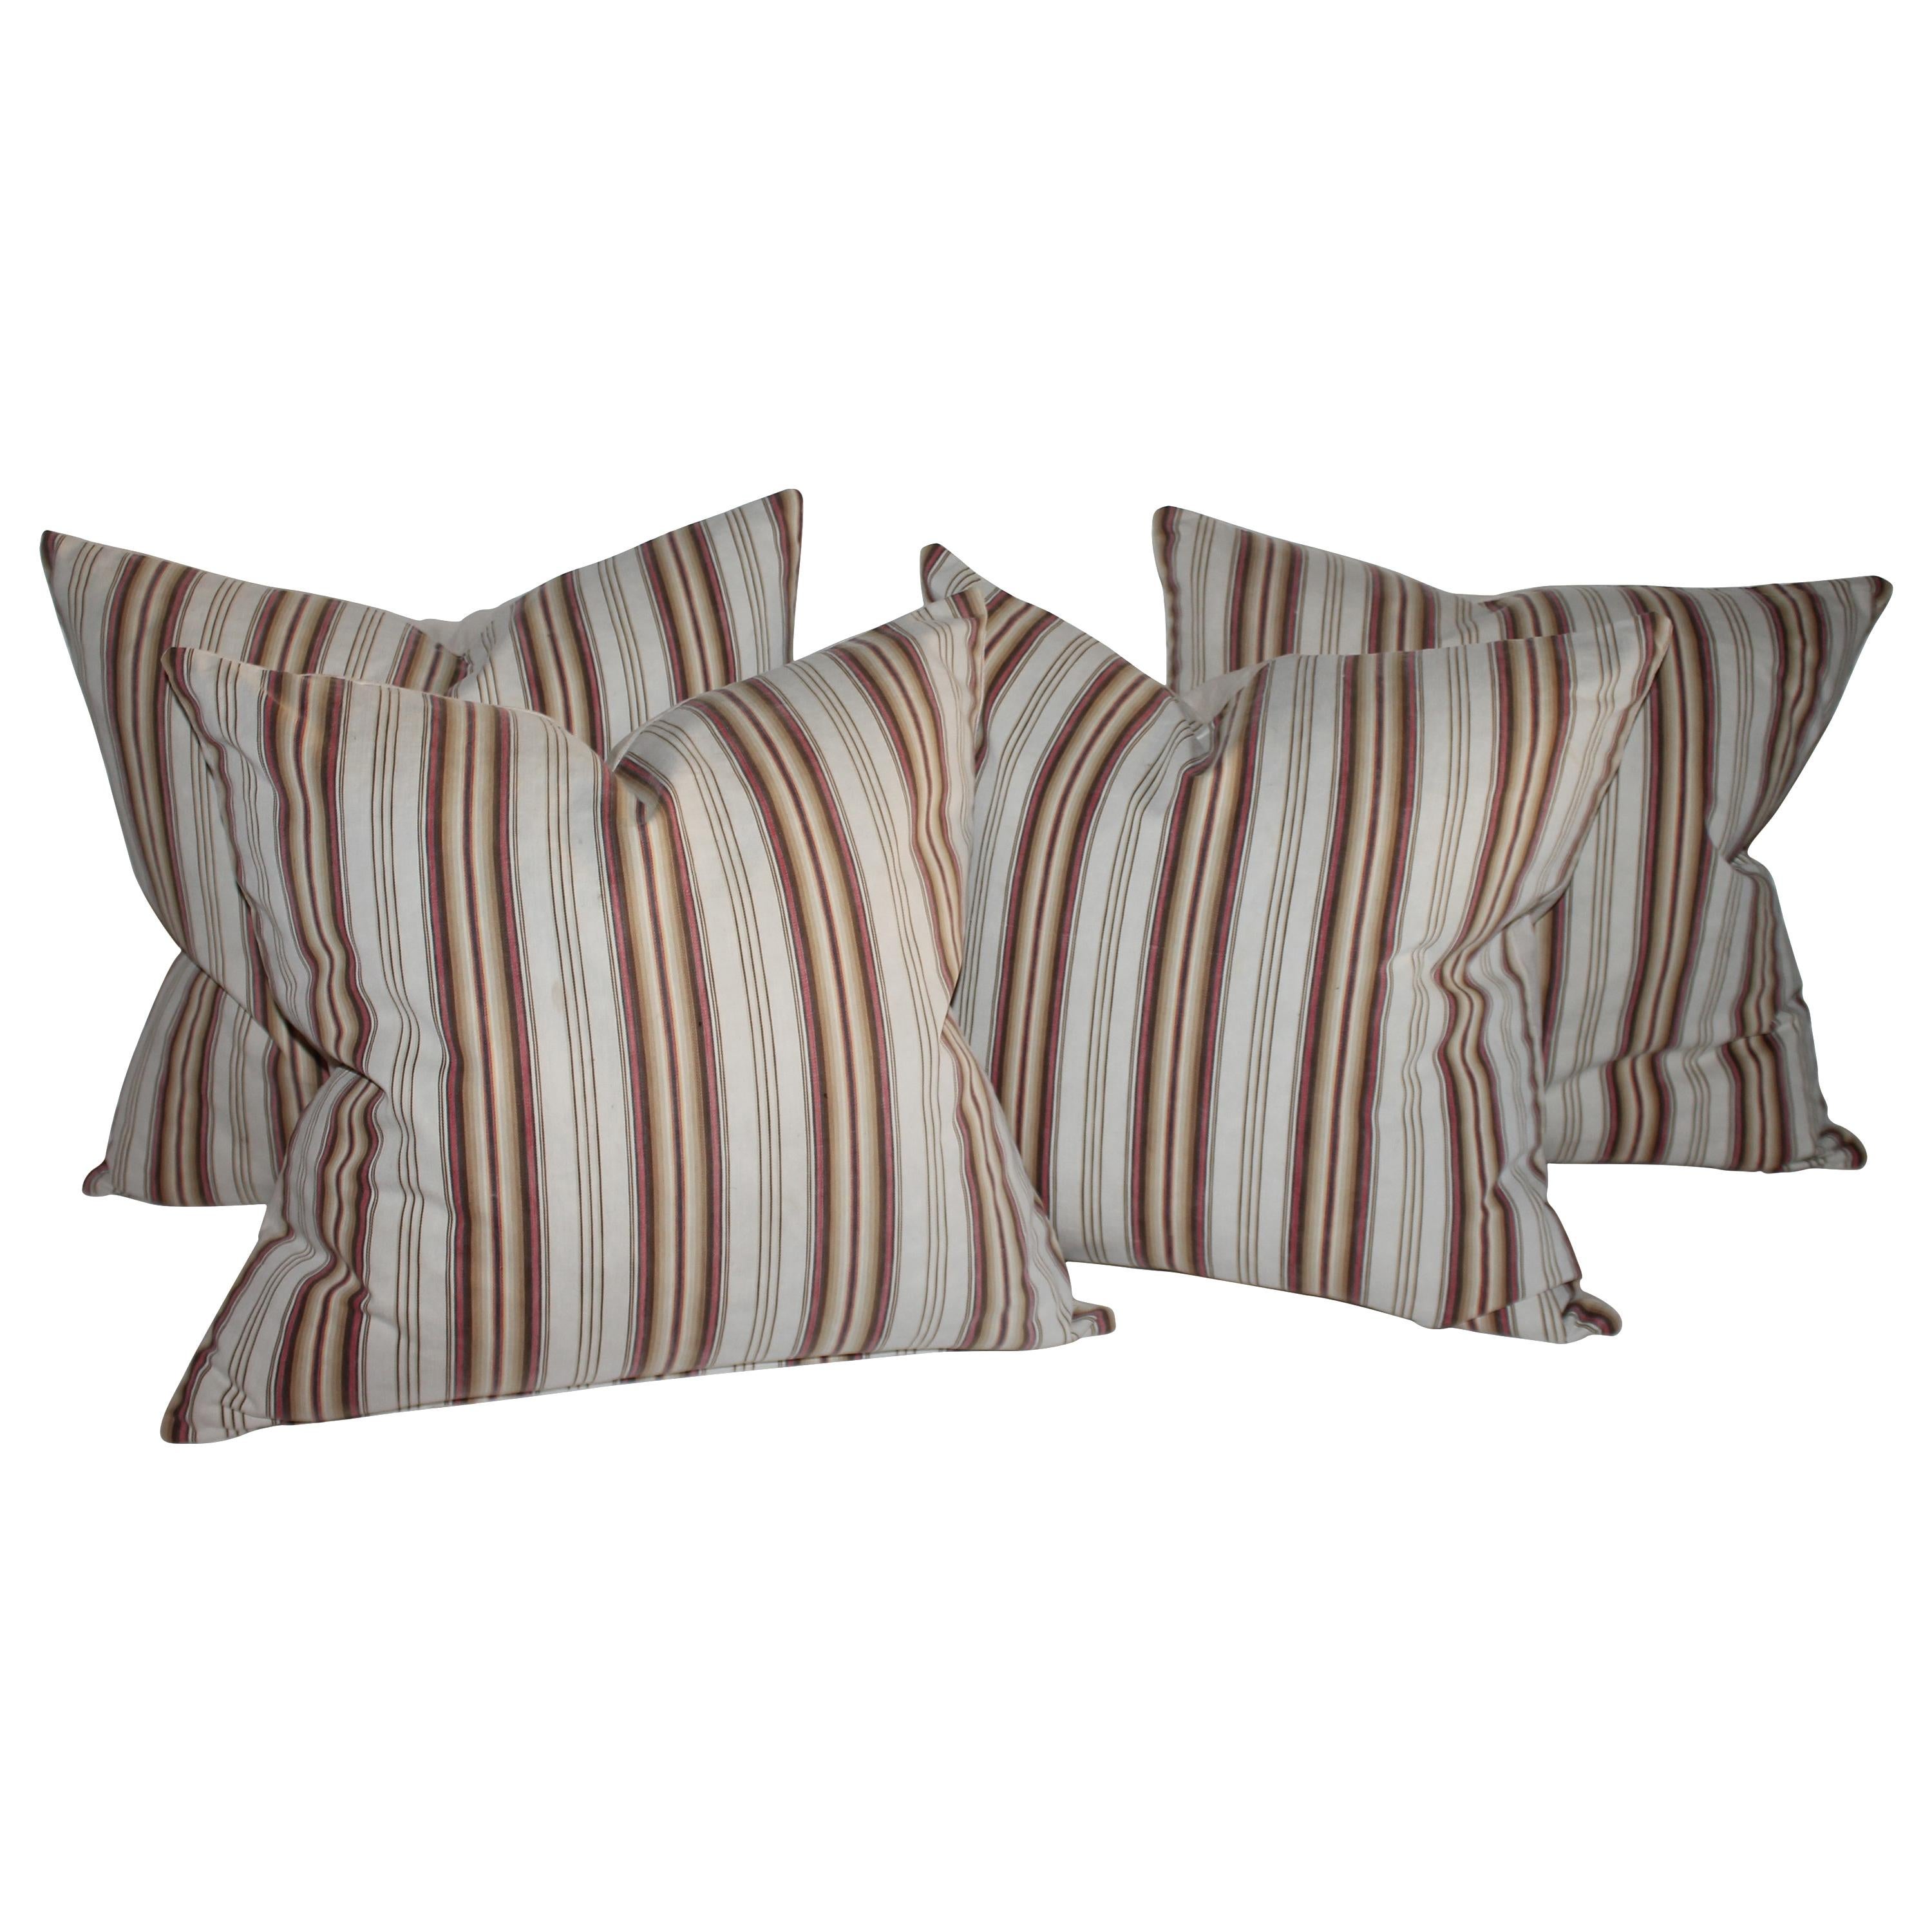 Collection of Four 19thc Ticking Stripe Pillows, Two Pairs